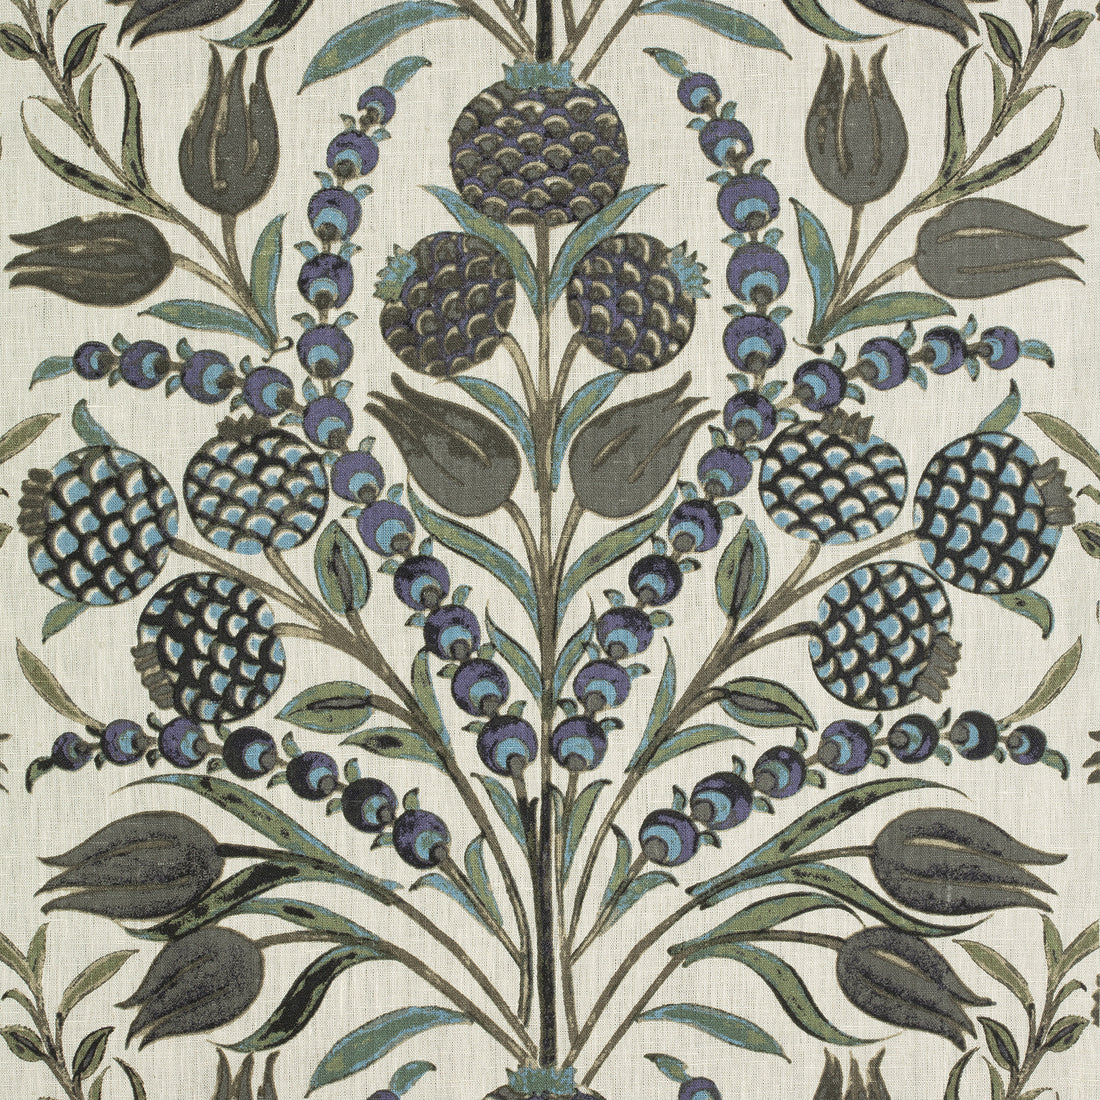 Corneila fabric in purple and blue color - pattern number F972600 - by Thibaut in the Chestnut Hill collection